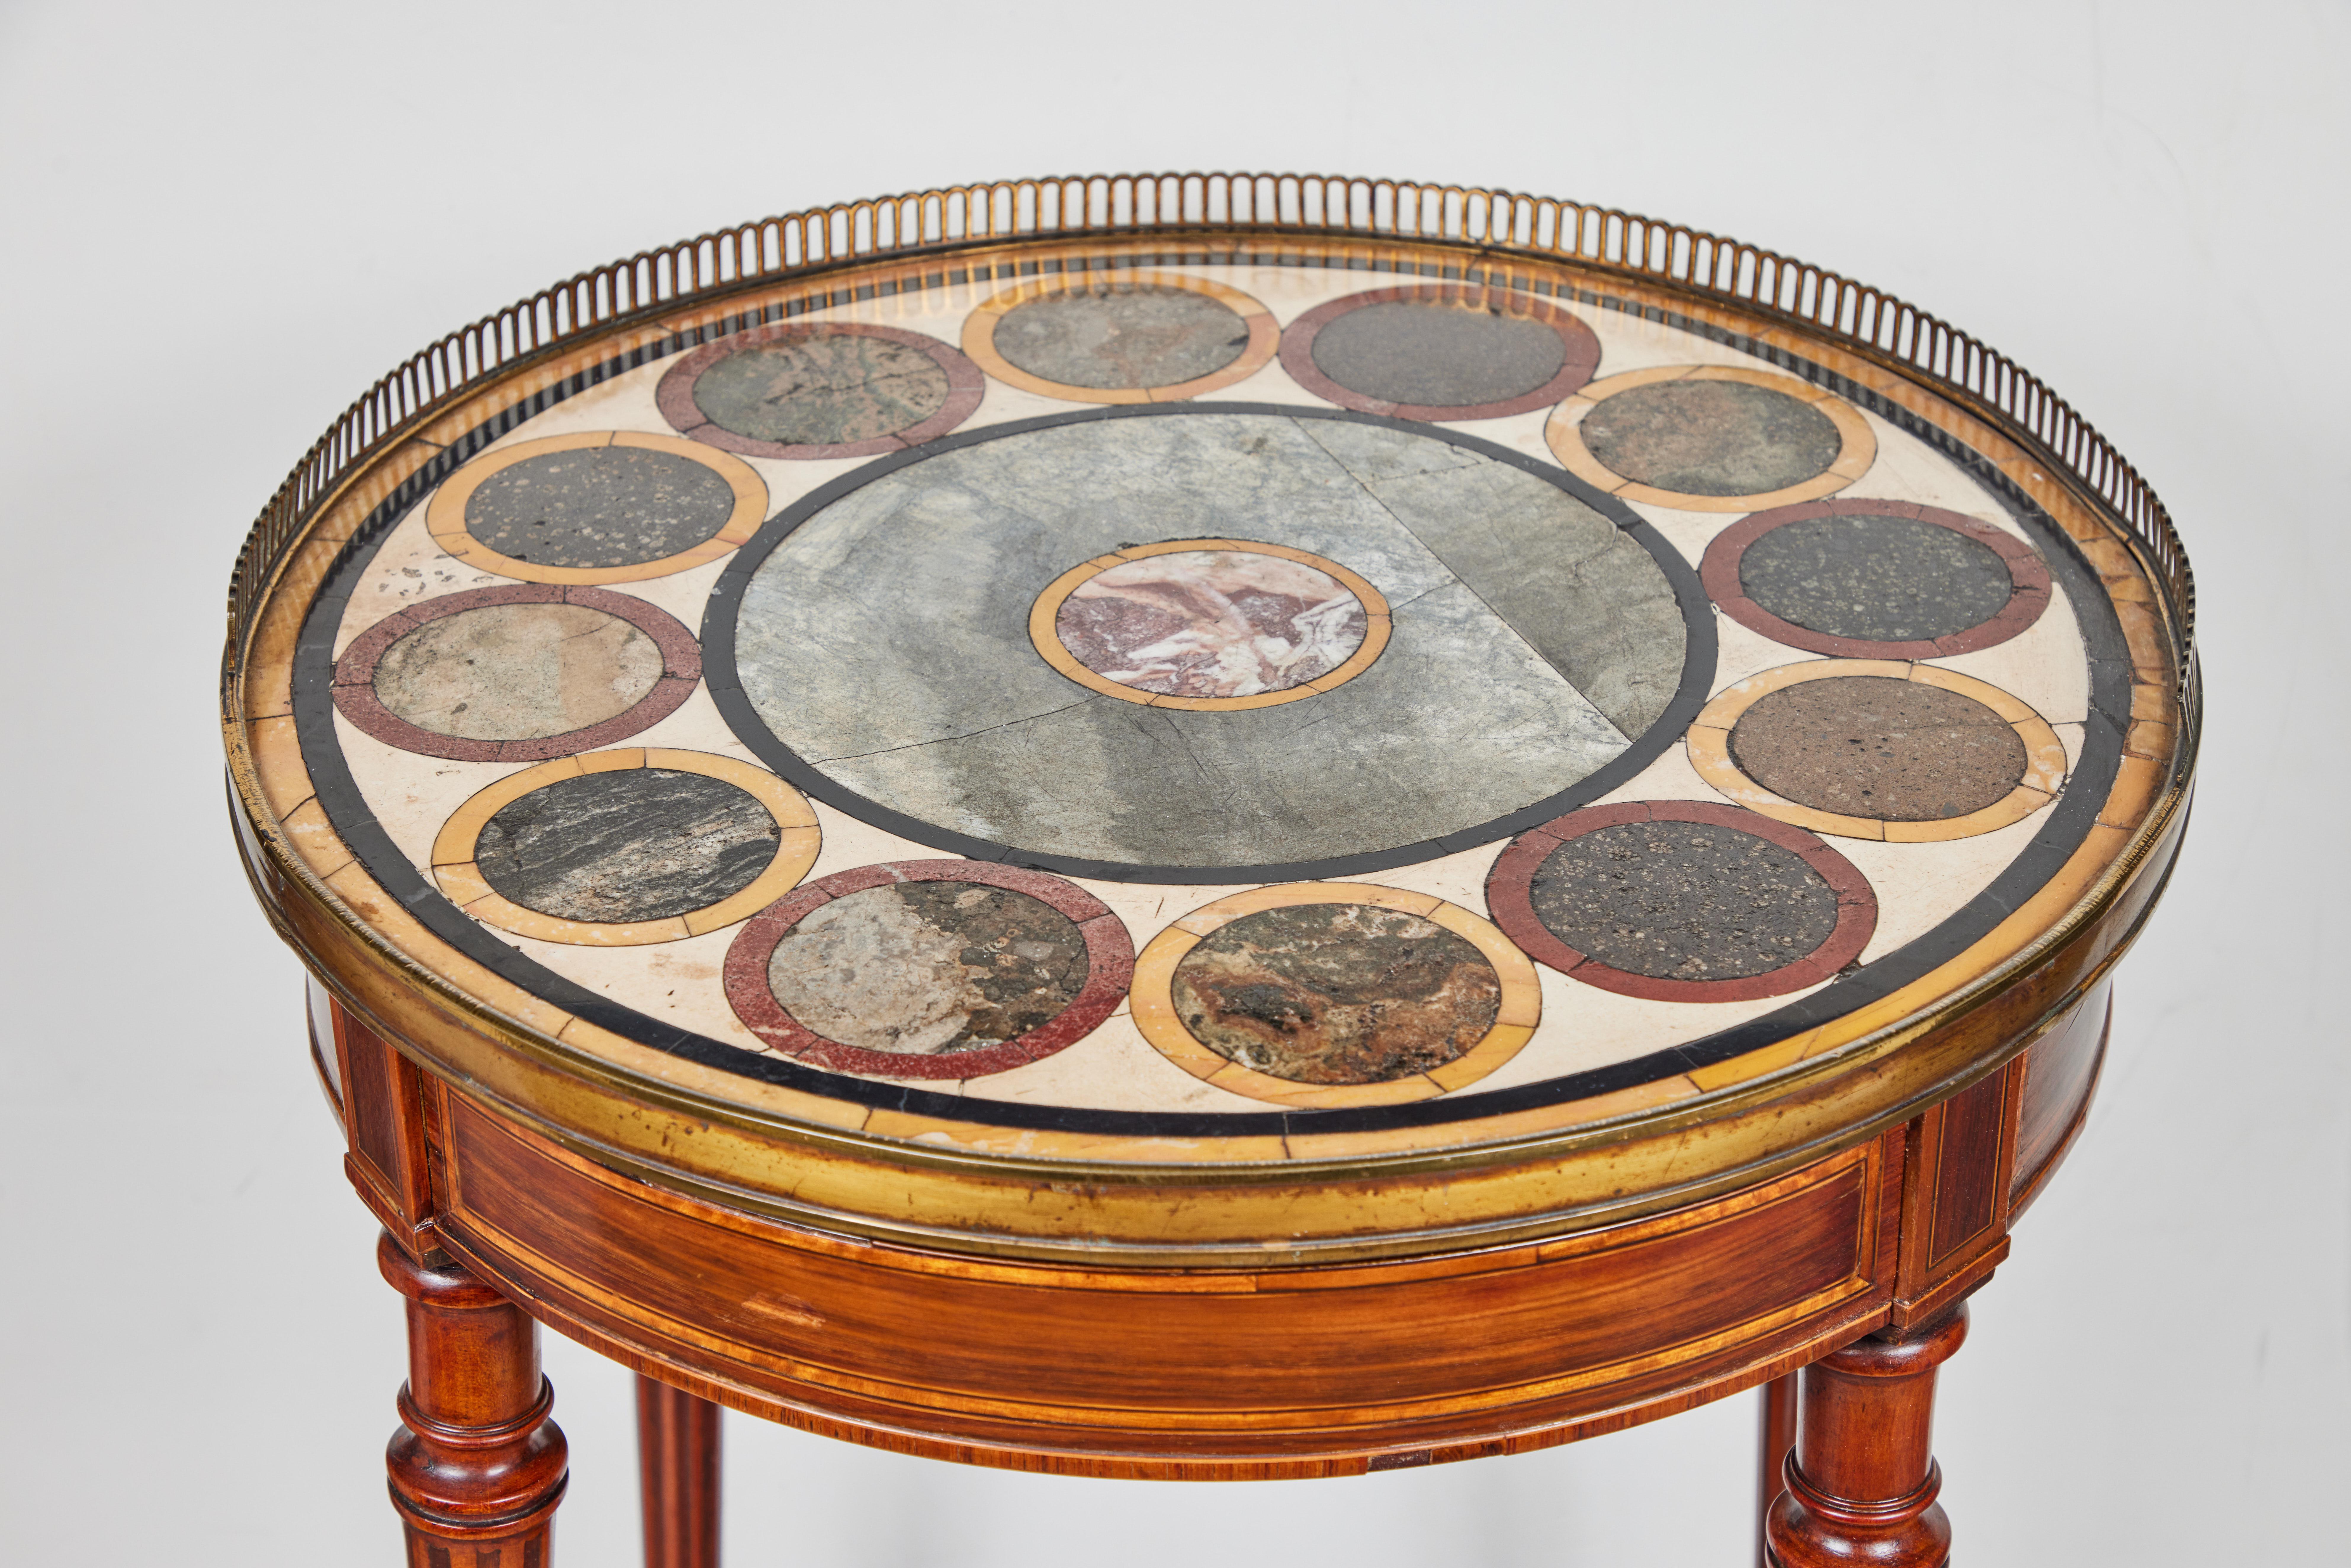 A fabulous, round, single drawer, Italian occasional table on gilt bronze, wheeled feet. The 19th c. inlaid, walnut base is surmounted by a wonderful, 18th c., marble top surrounded by a half-moon, pierced, gilt bronze parlor.